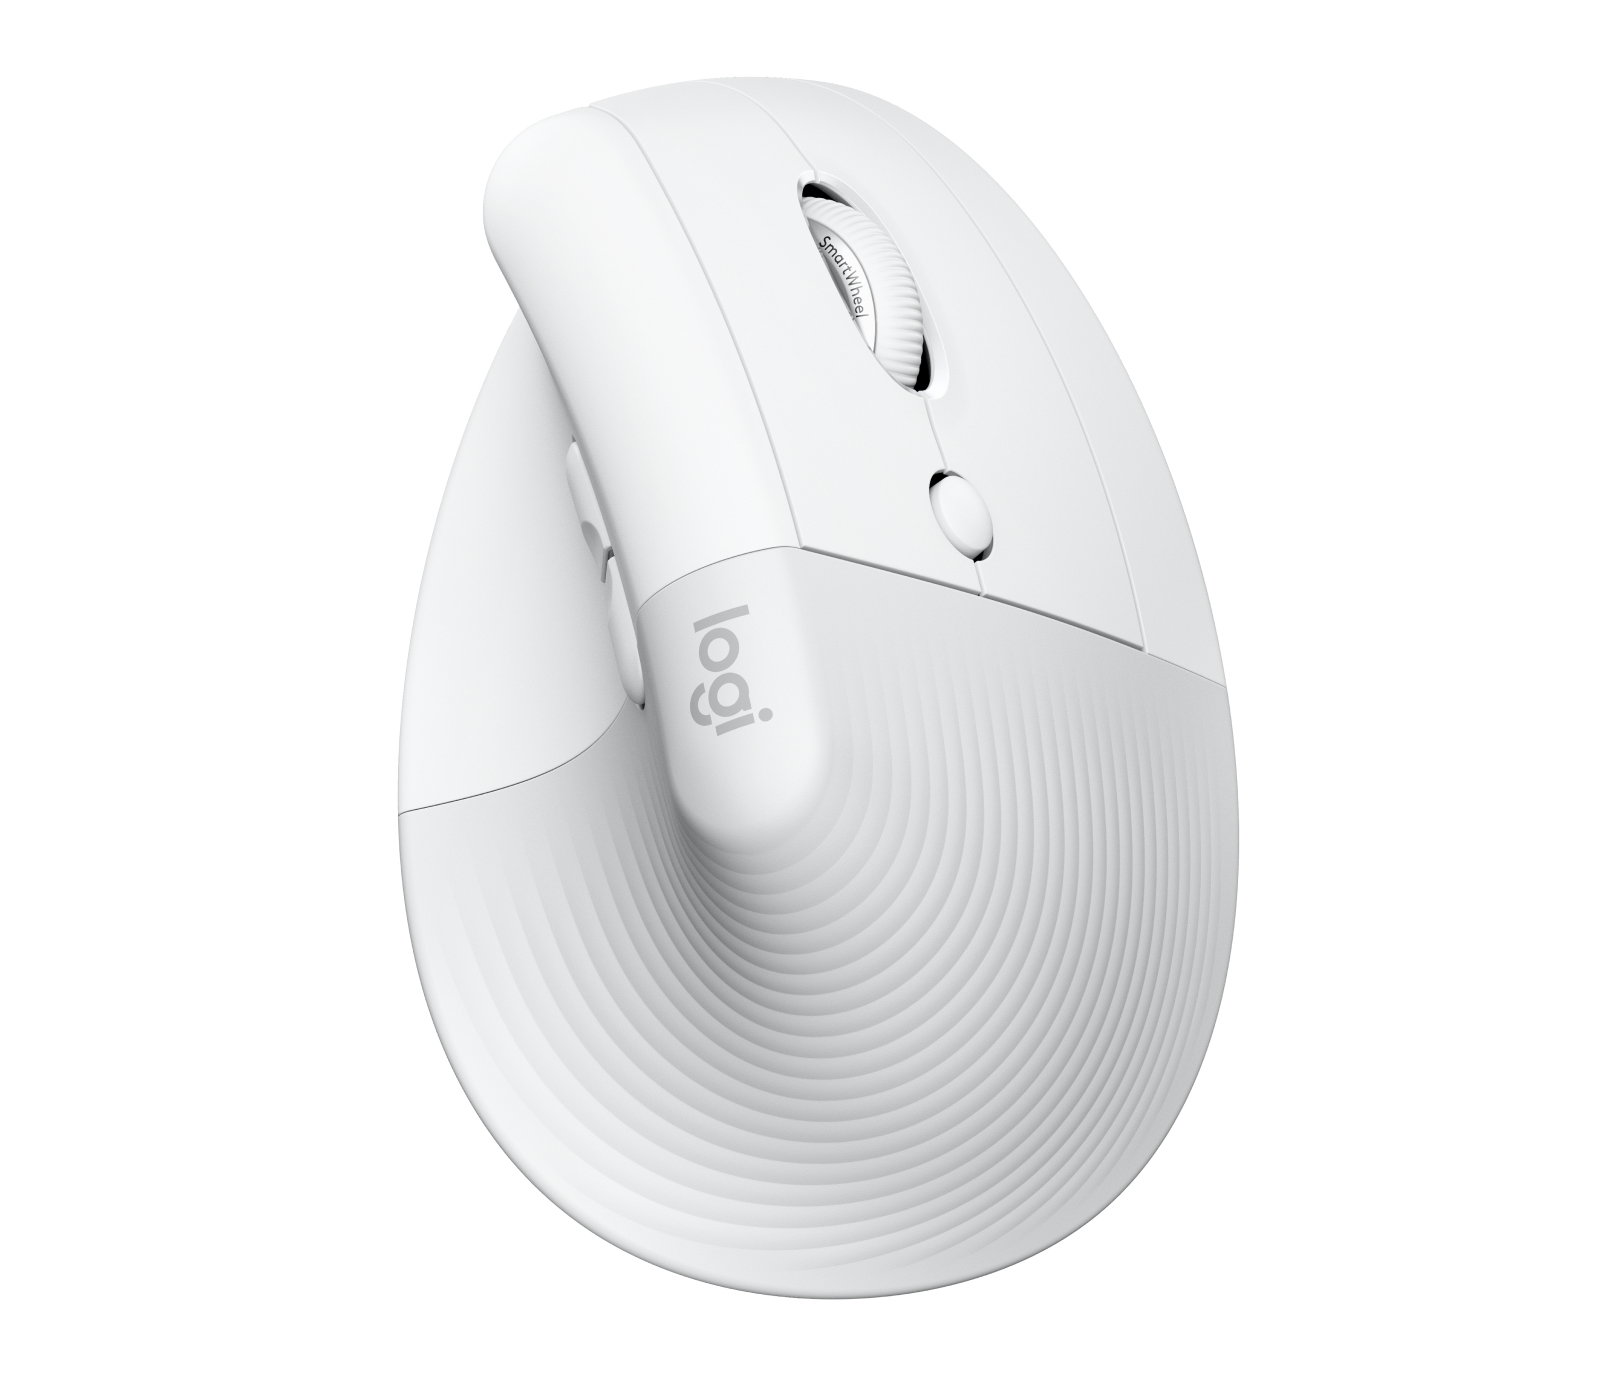 Logitech Lift for Business mouse Right-hand RF Wireless + Bluetooth Optical 4000 DPI